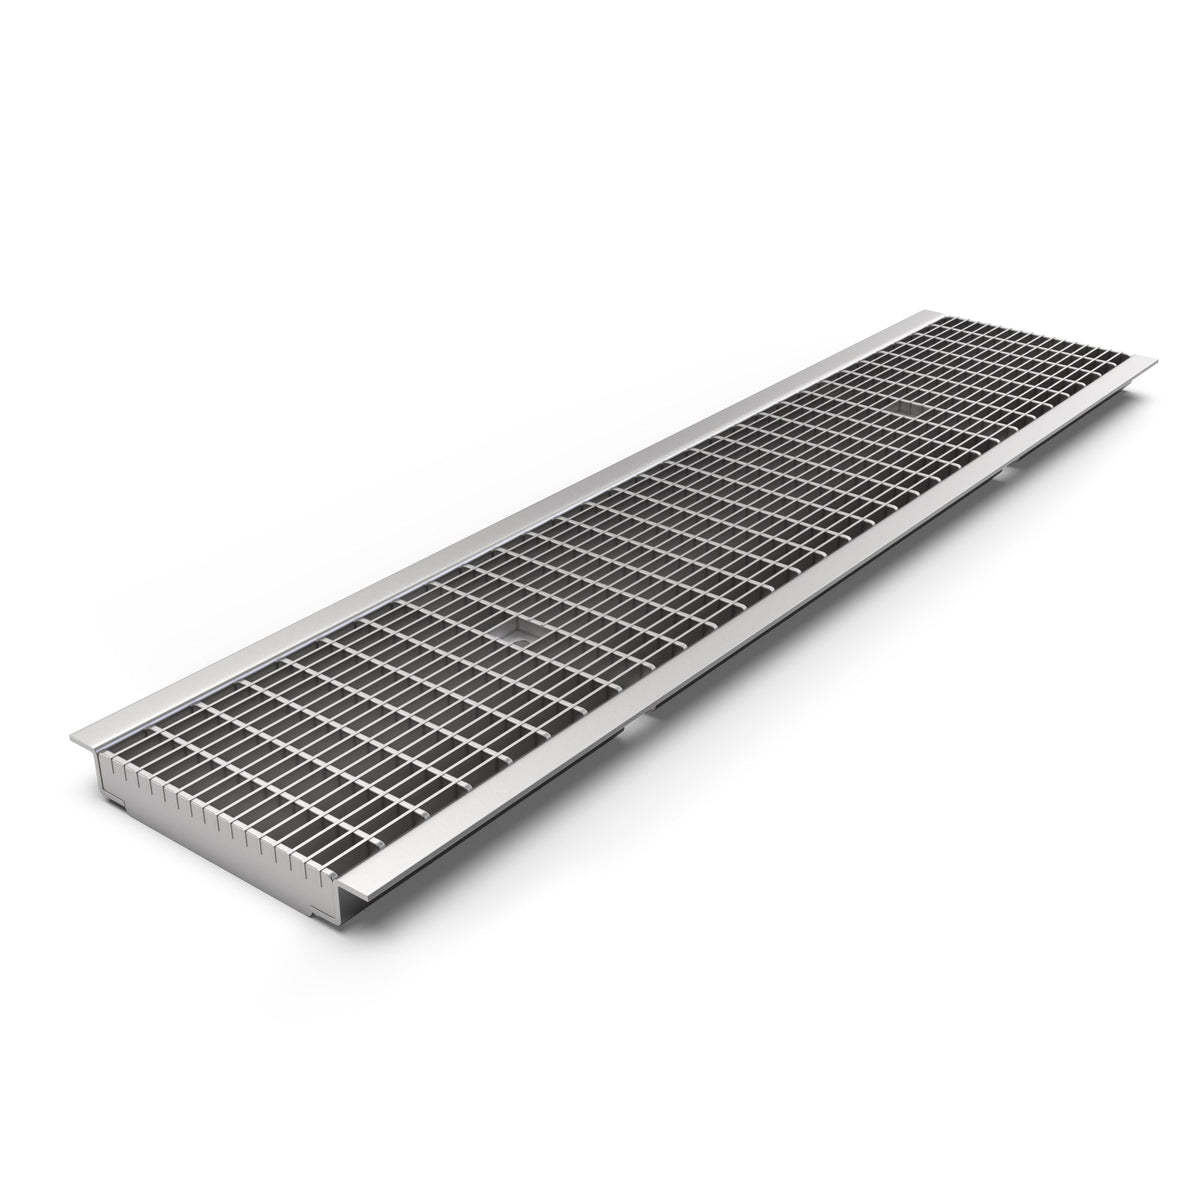 ST-38 - 3/8 inch - Stainless Steel Grating